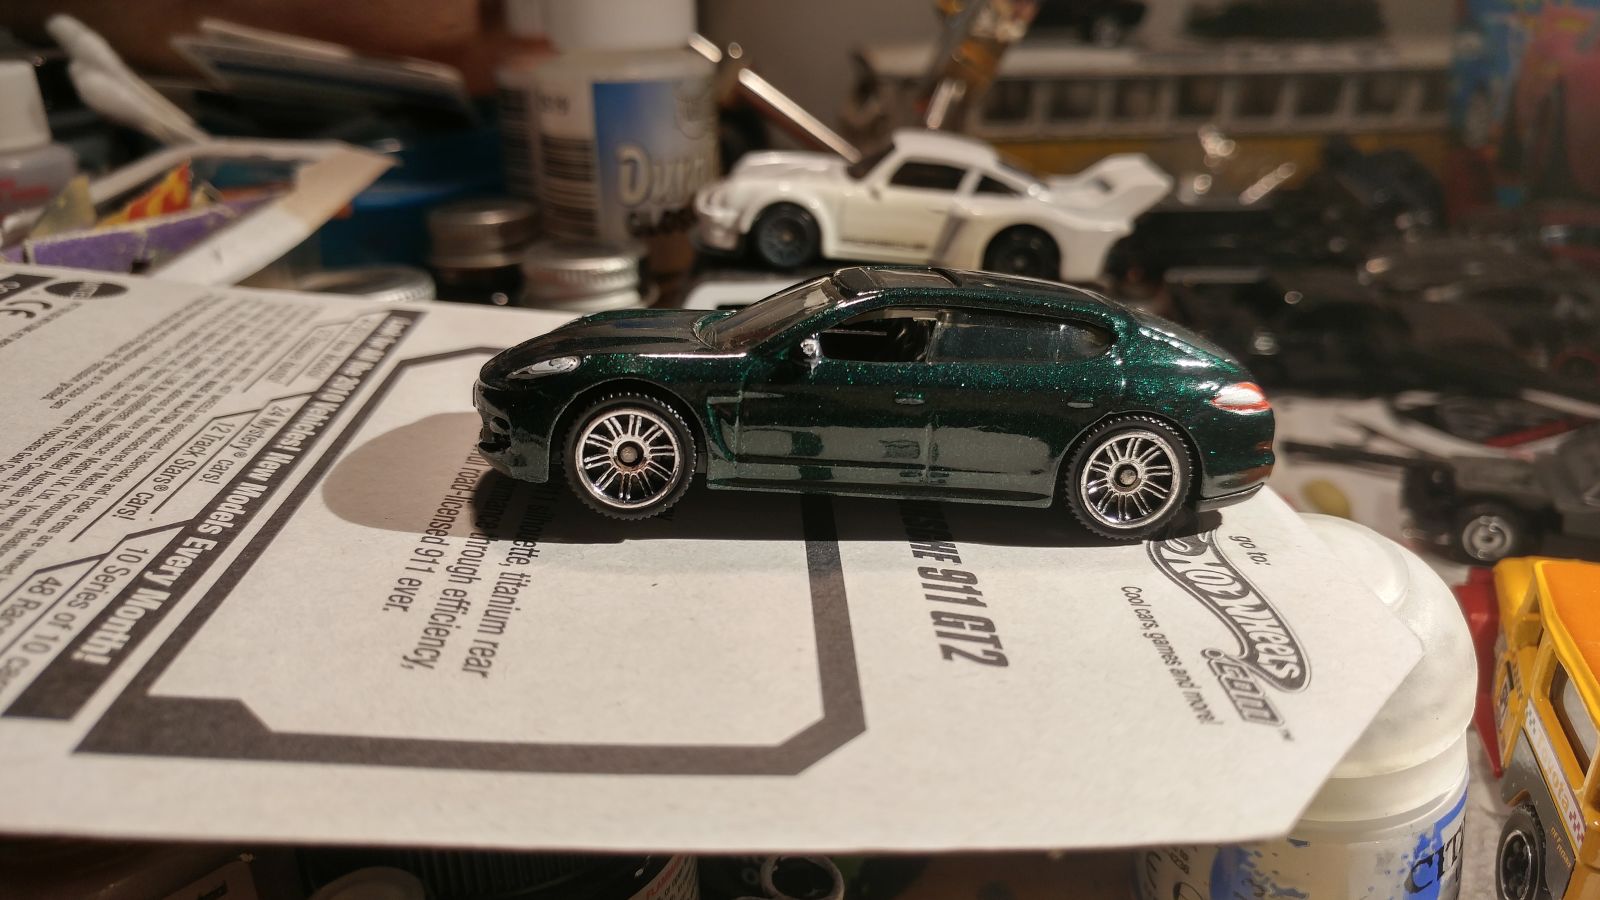 Gorgeous shade of green on this Matchbox Panamera. I only had the silver version, but this one is perfect!